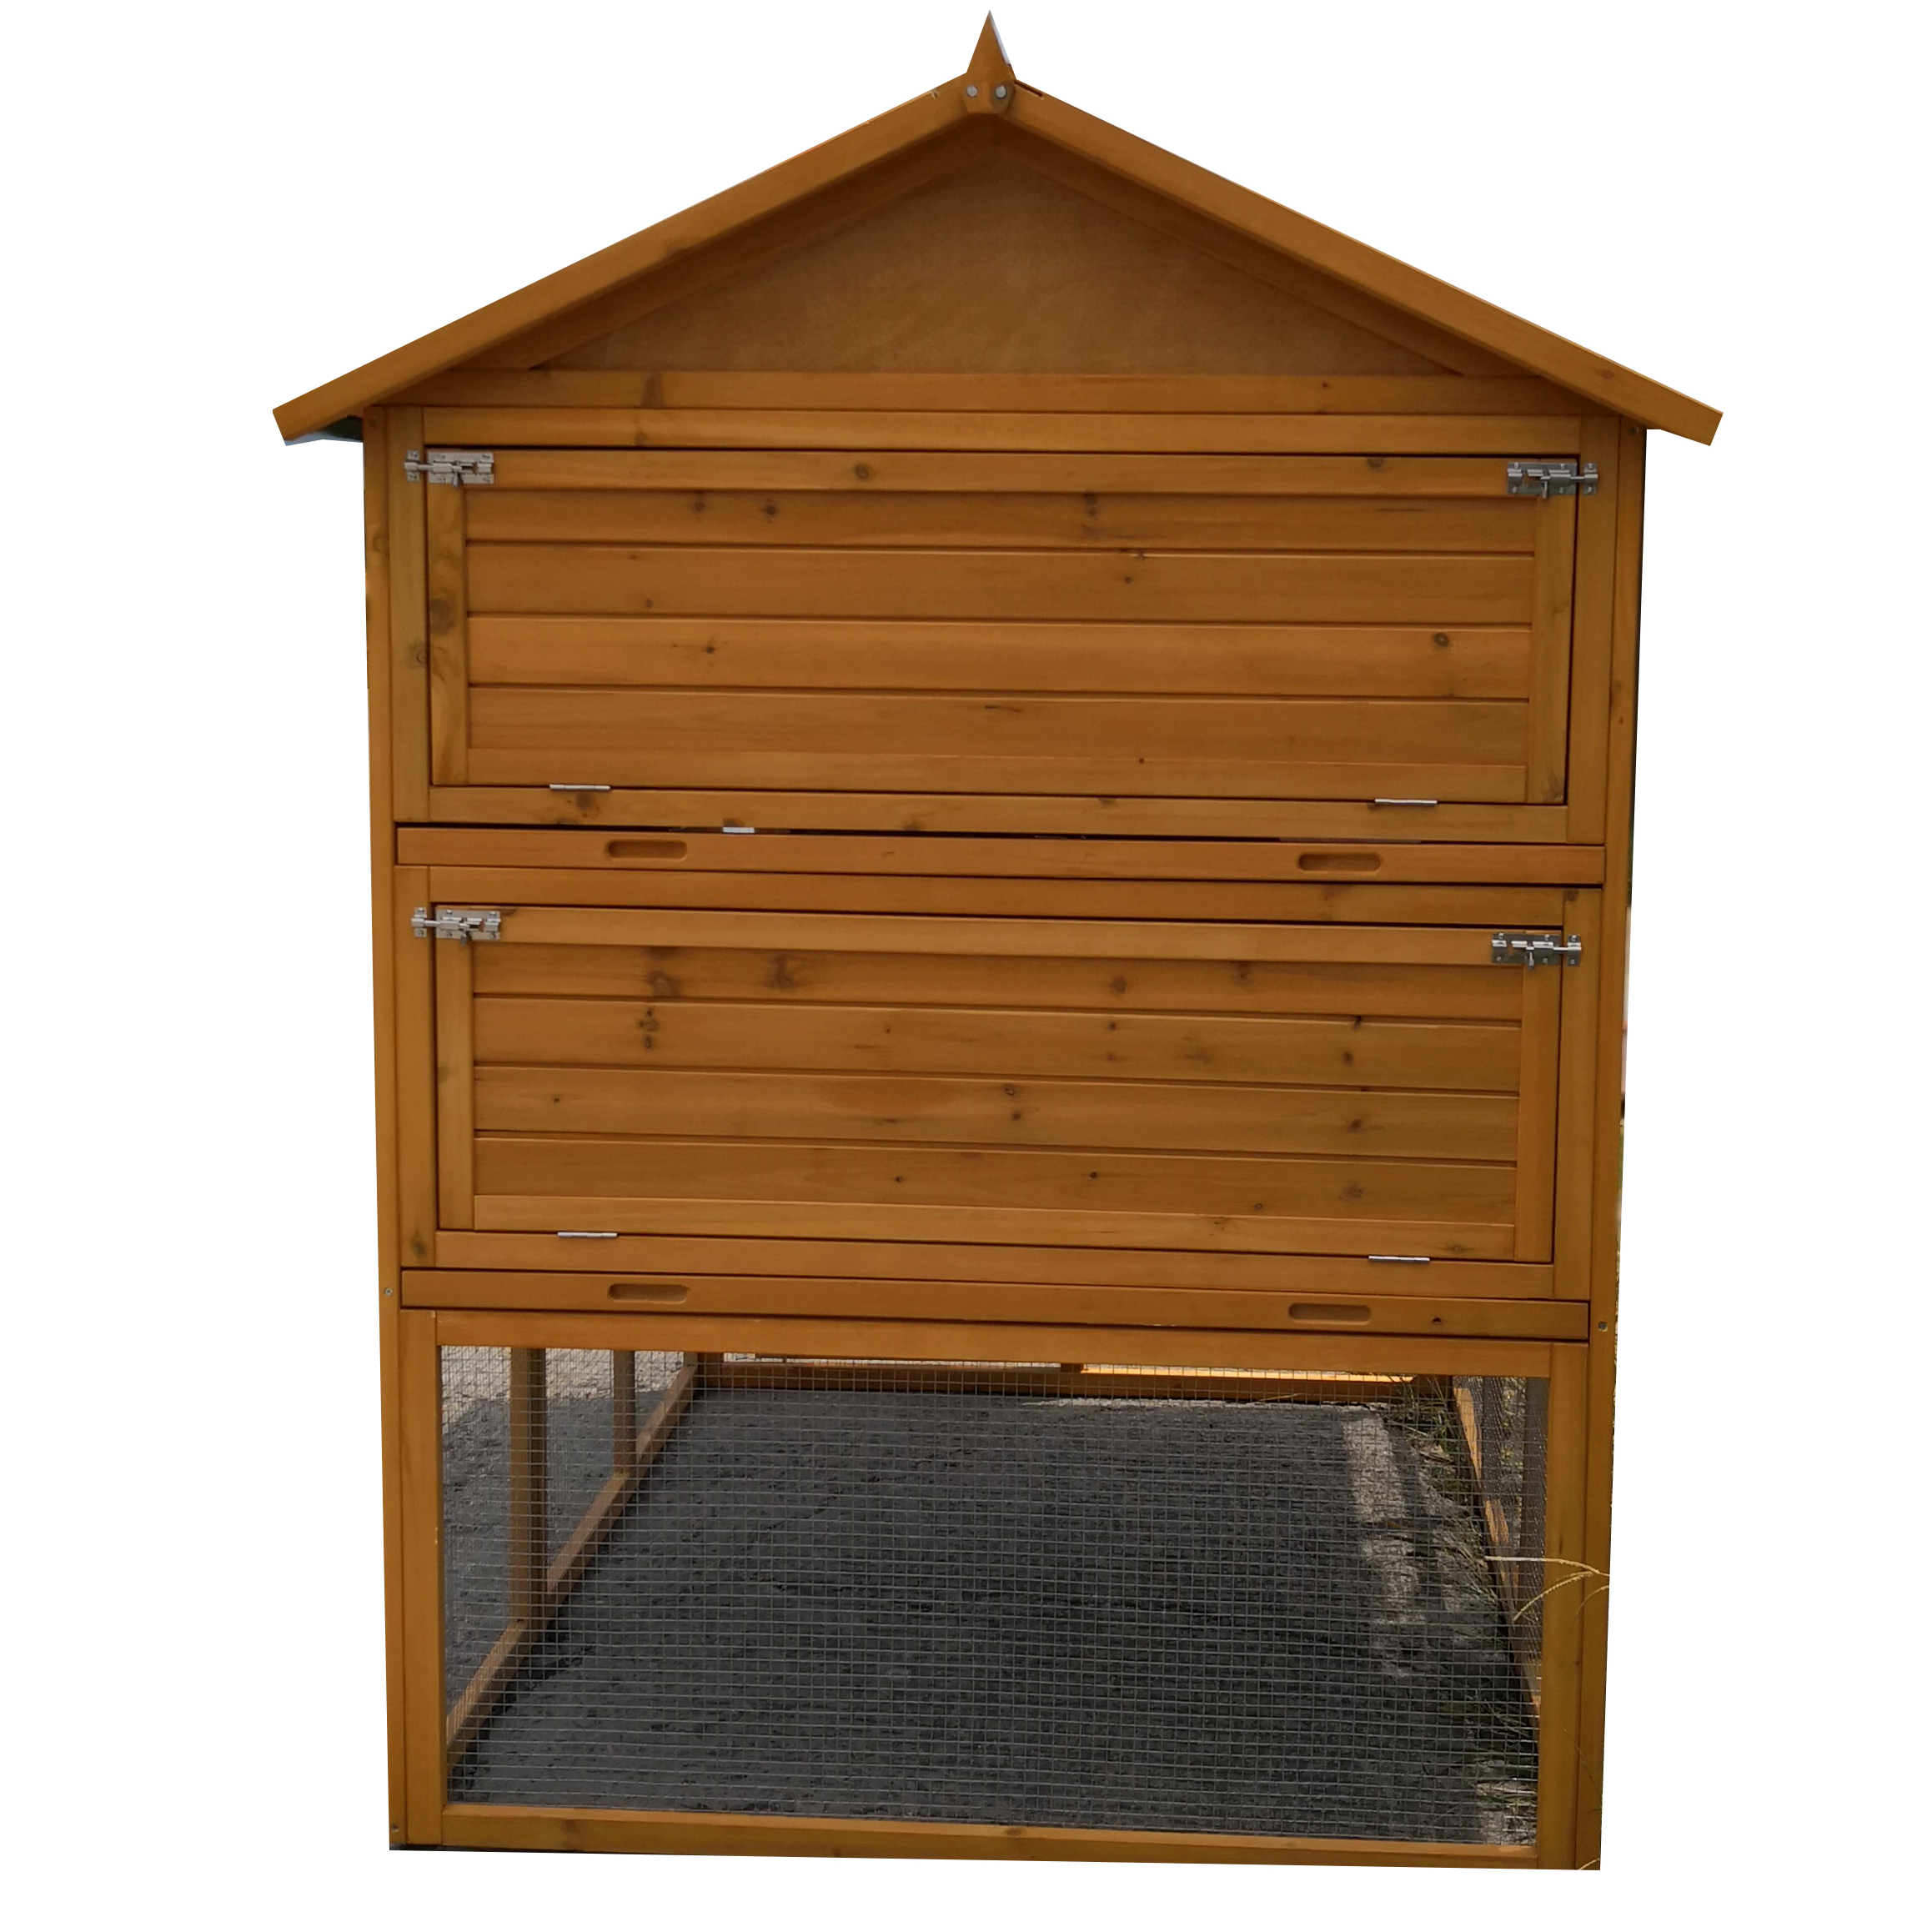 Wholesale Pet Supplies antique wooden canary bird cage Suitable for Small Birds with Feed Door